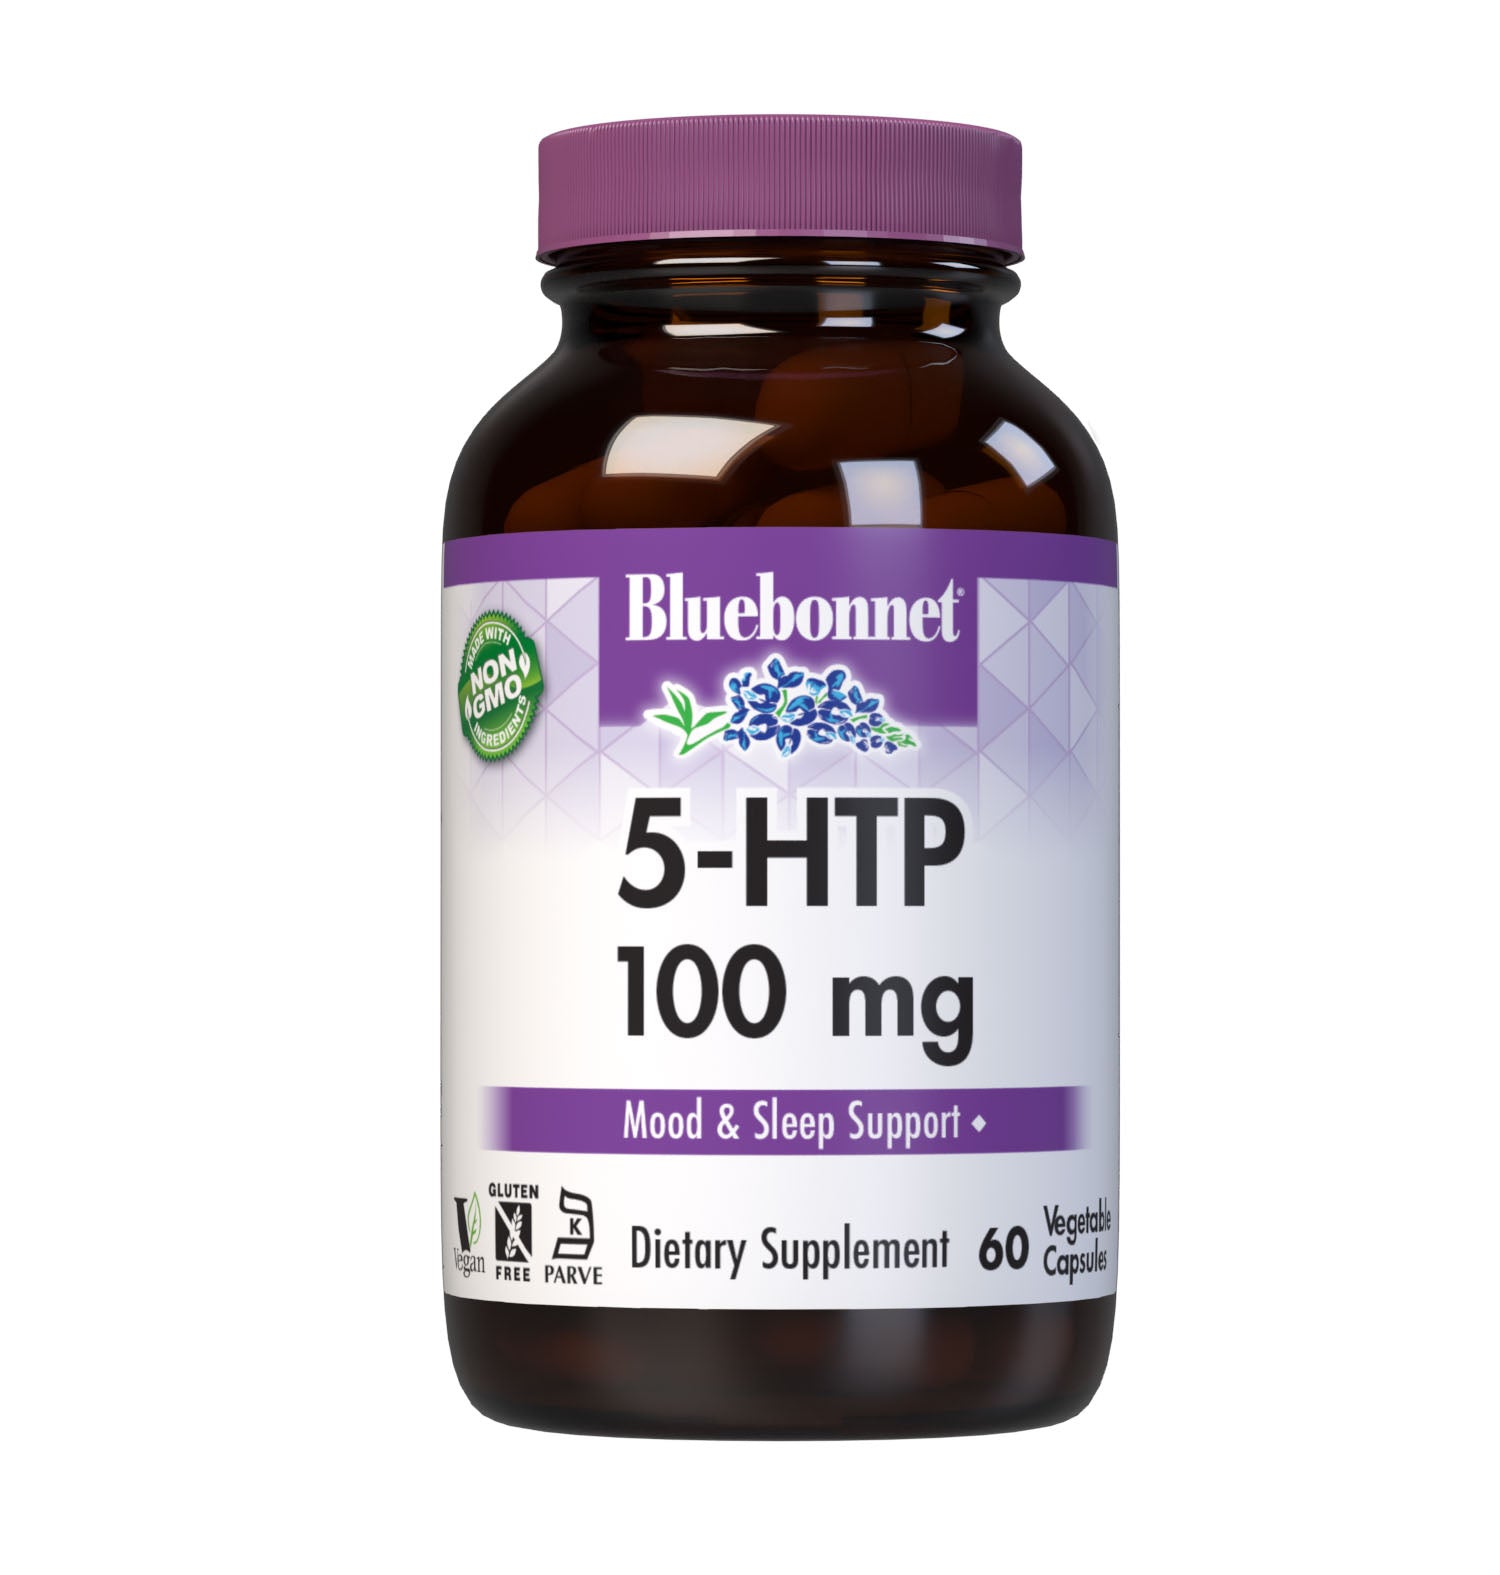 Bluebonnet's 5-HTP 100 mg 60 Vegetable Capsules are formulated to help support healthy weight management, mood, relaxation, and occasional sleeplessness with 5-hydroxytryptophan from Griffonia simplicifolia. Guaranteed free of Peak-X. may help with neurotransmitter support and positive mood. #size_60 count